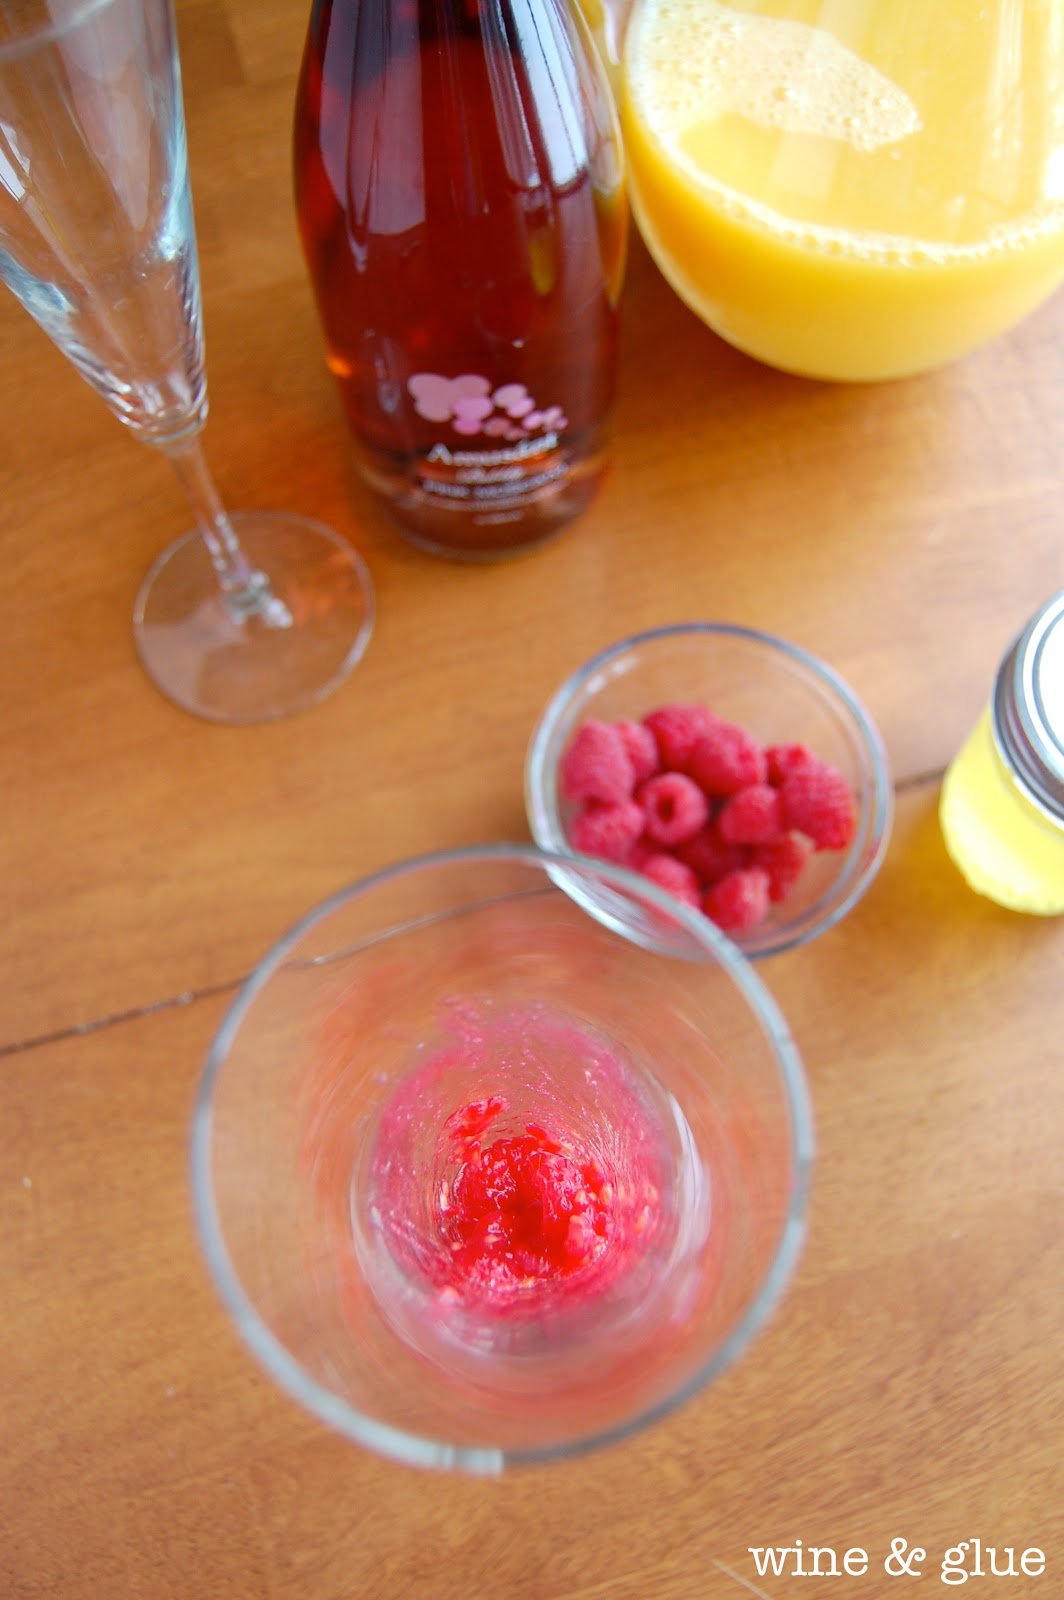 This Sunrise Mimosa cocktail is fruity, beautiful and totally refreshing. Super easy to make and tastes delicious!